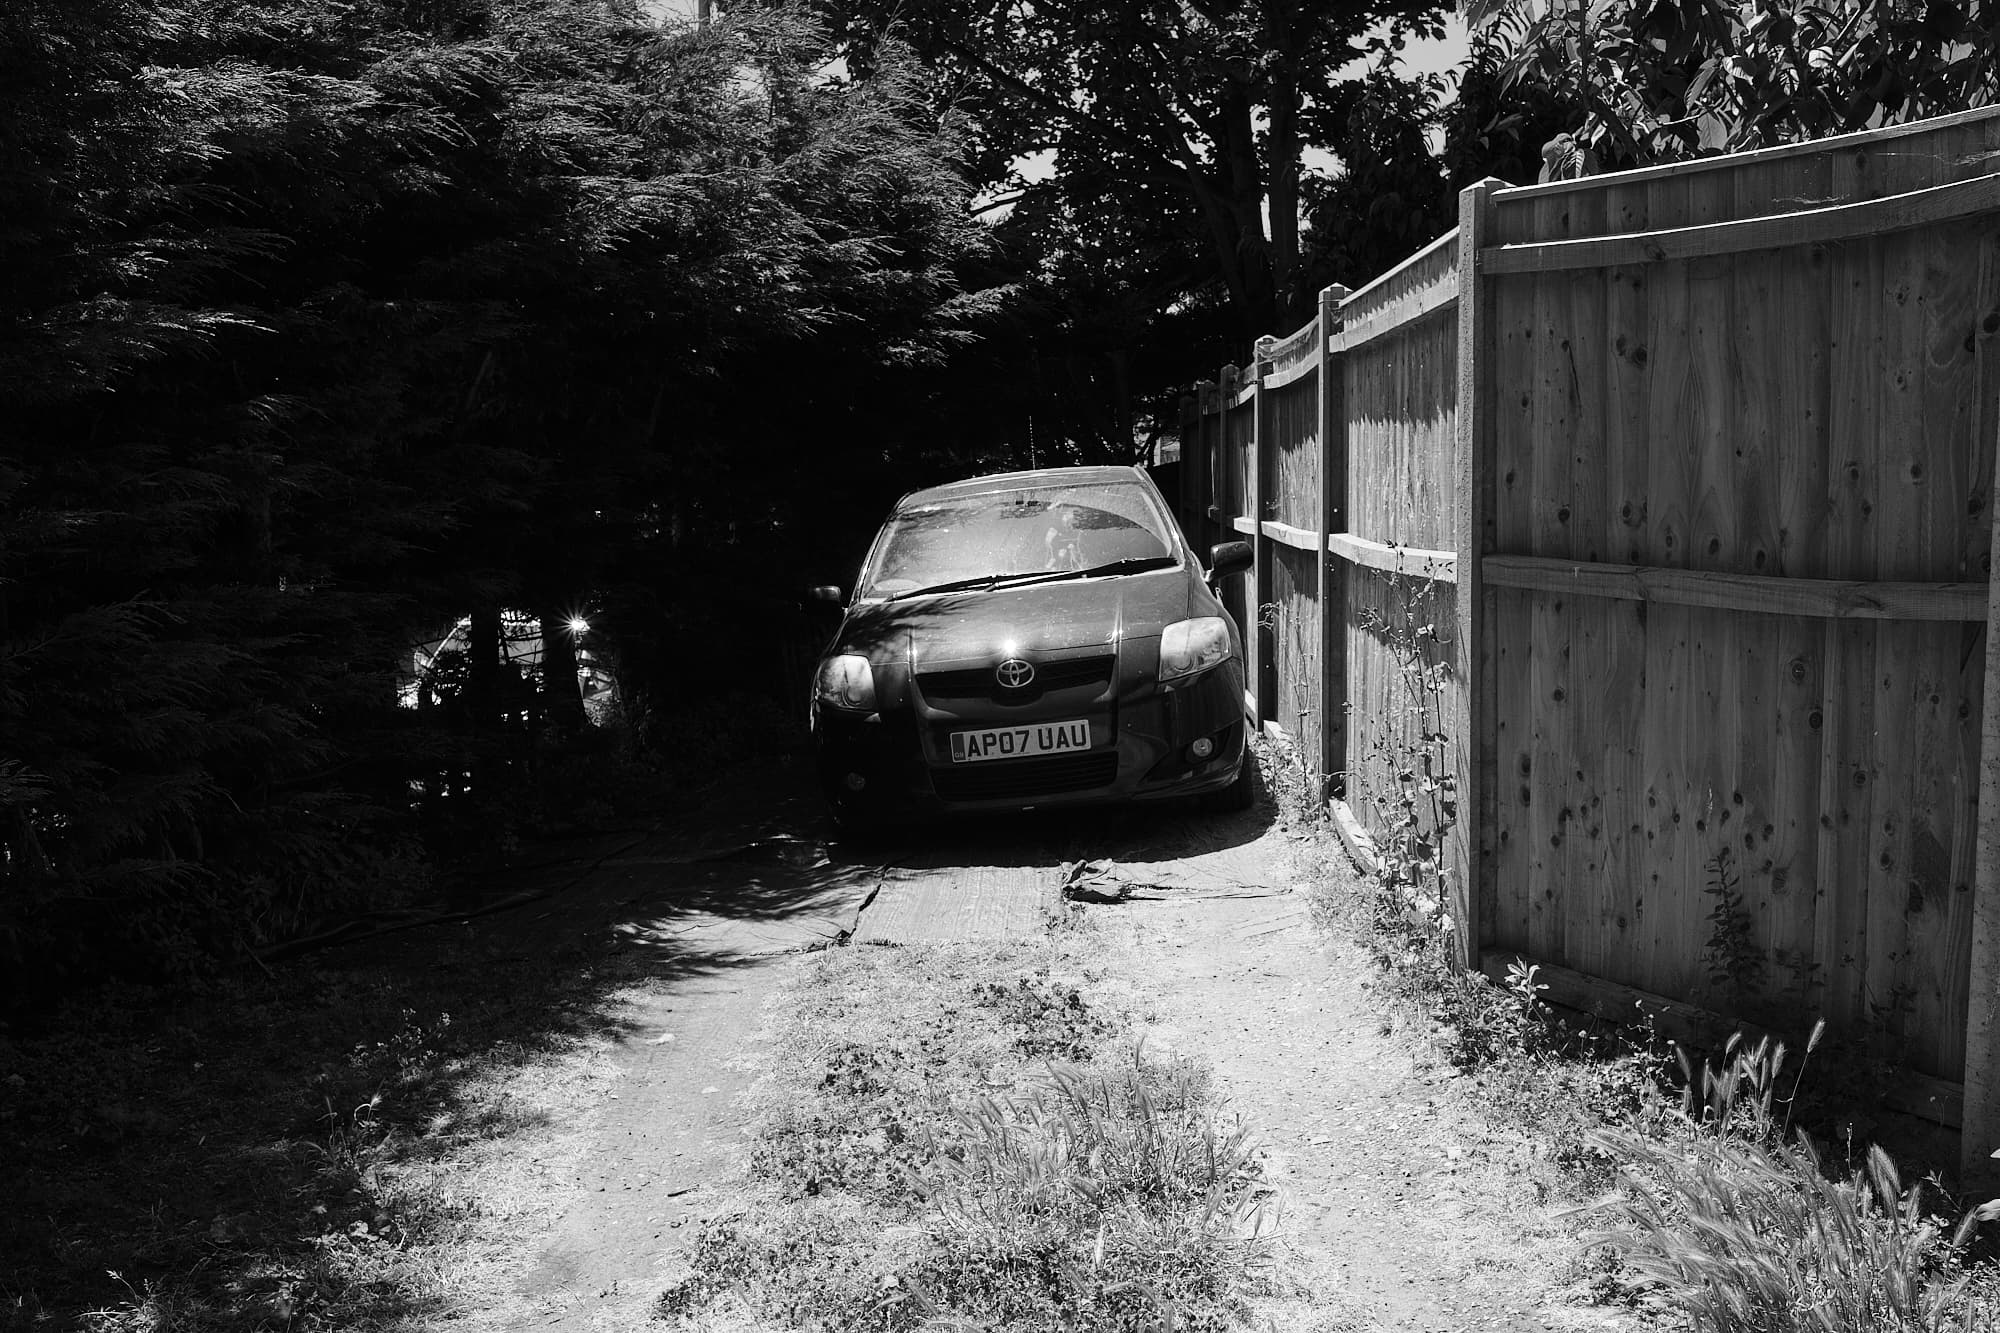 car parked by a wooden fence